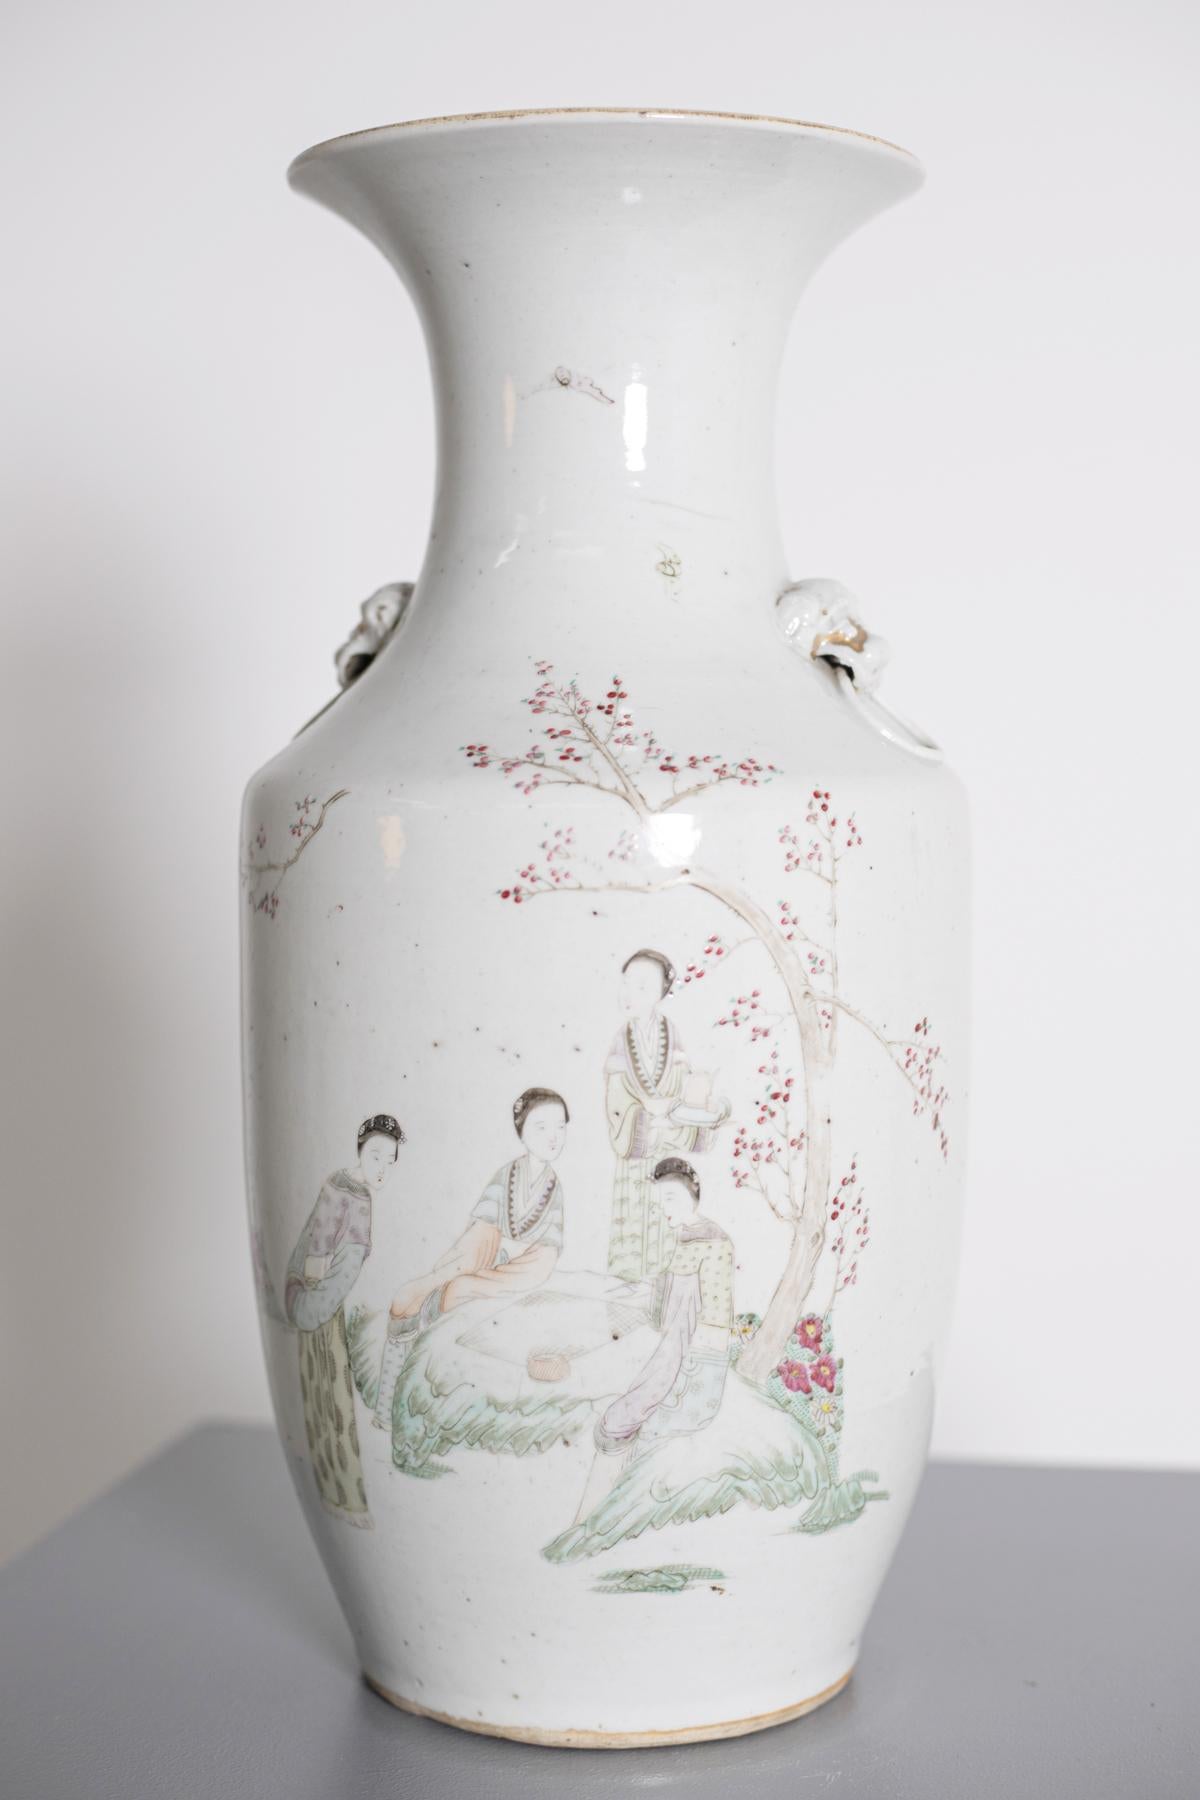 Antique Chinese porcelain vase from the period of the rose family. On the surface there is a scene of everyday life with four elegant women as protagonists who spend their time in the garden. The Rosa Family is a type of porcelain whose production